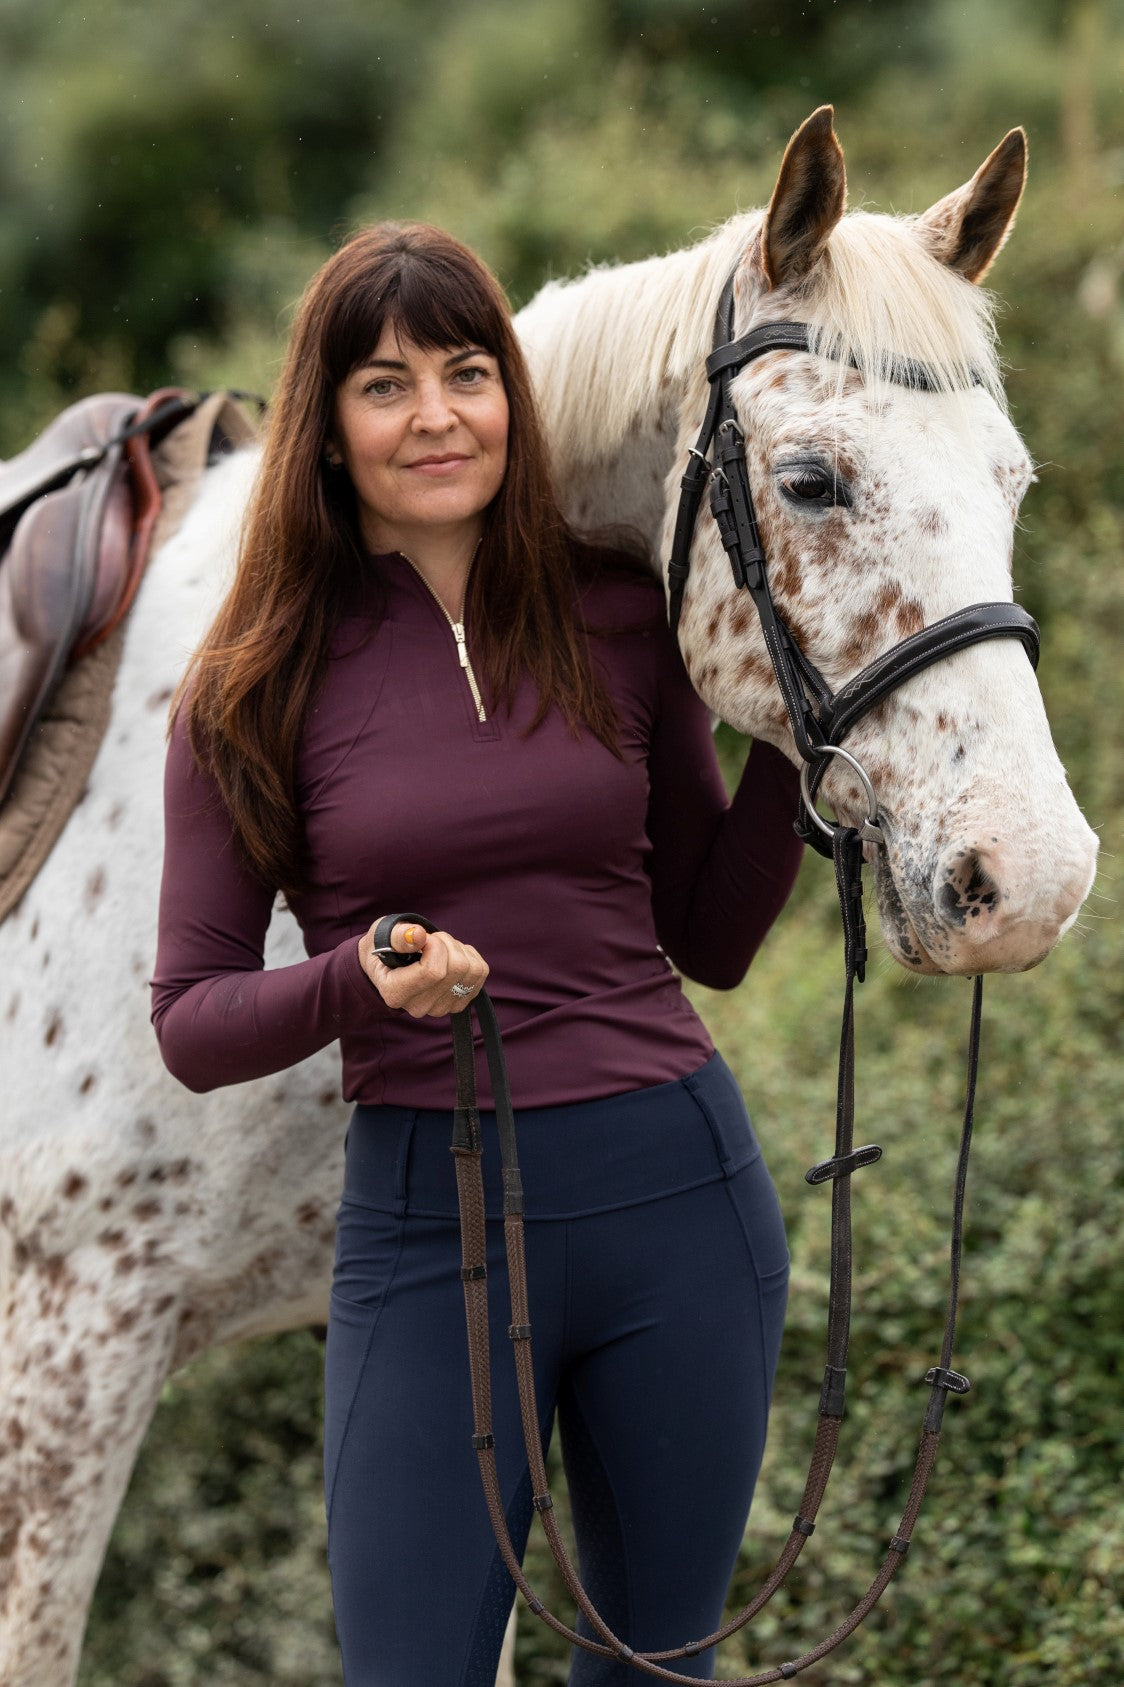 Horse riding clothes are the new (and original) athleisure